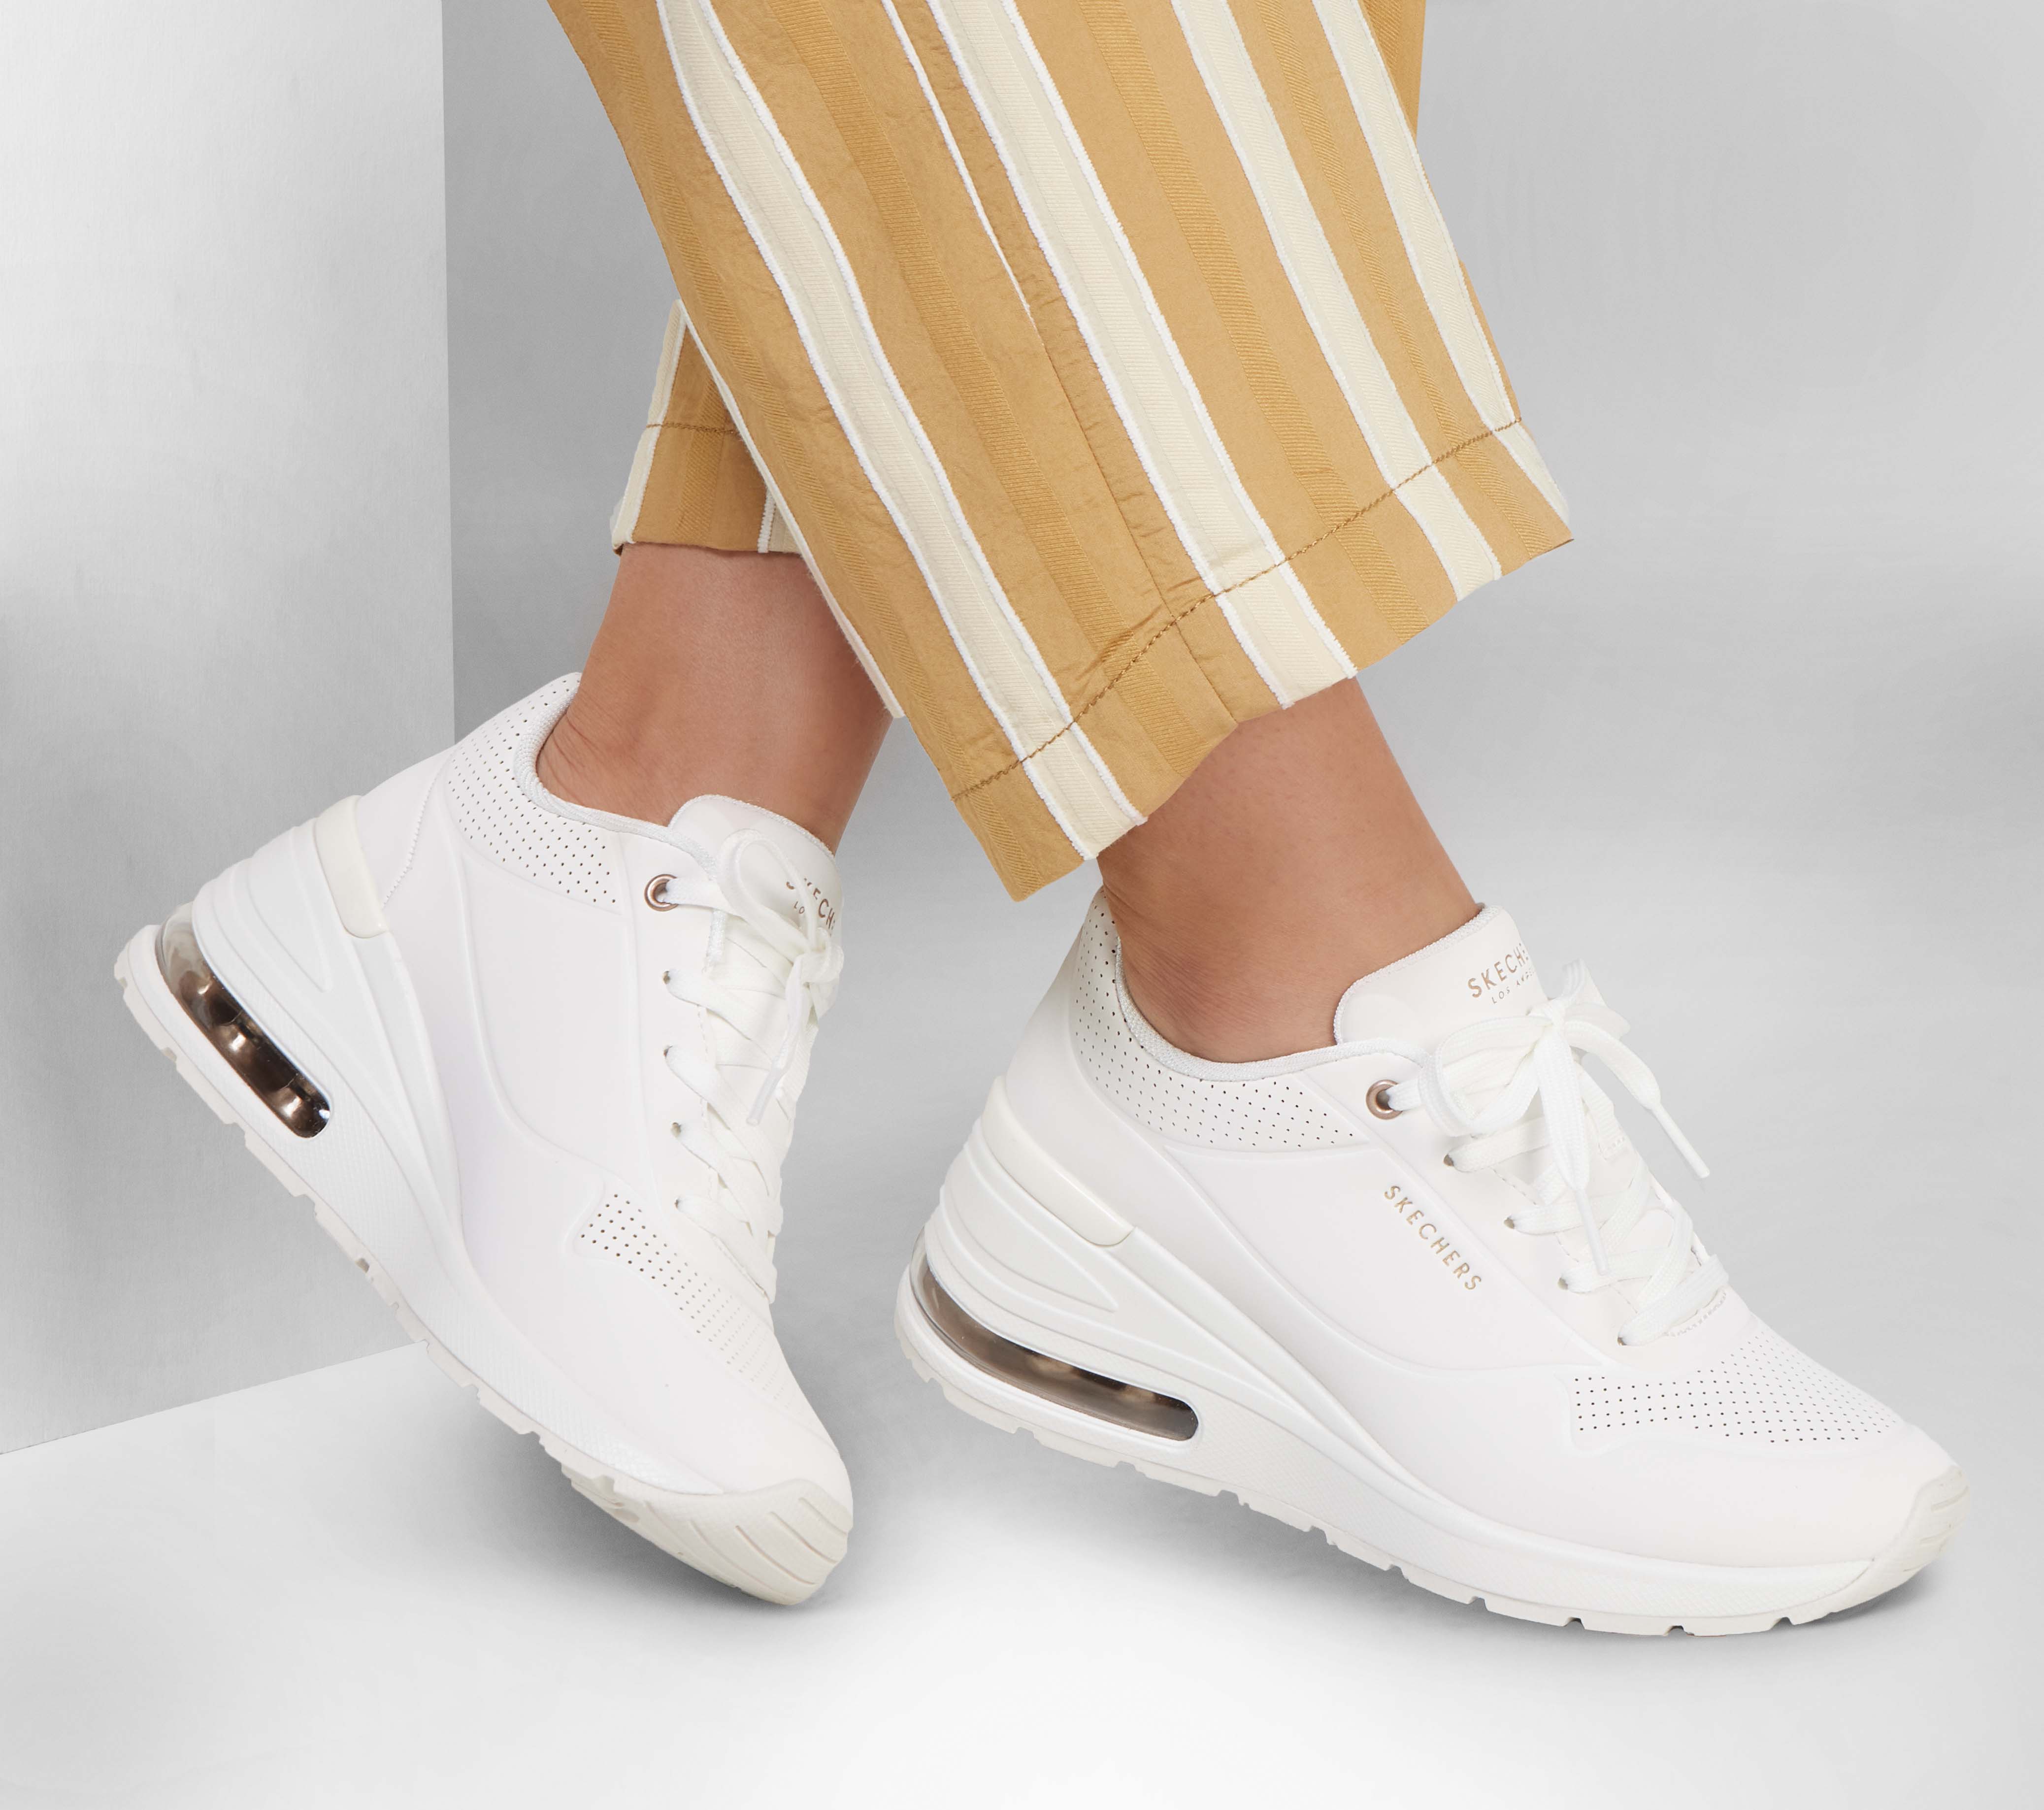 Original brands online - SKECHERS WOMEN ORIGINAL MILLION - AIR UP THERE  DISCOUNT 10% OFF Order now Mobile: 01012043443 DESCRIPTION : Get a new  perspective on fashionable sneaker style and comfort with